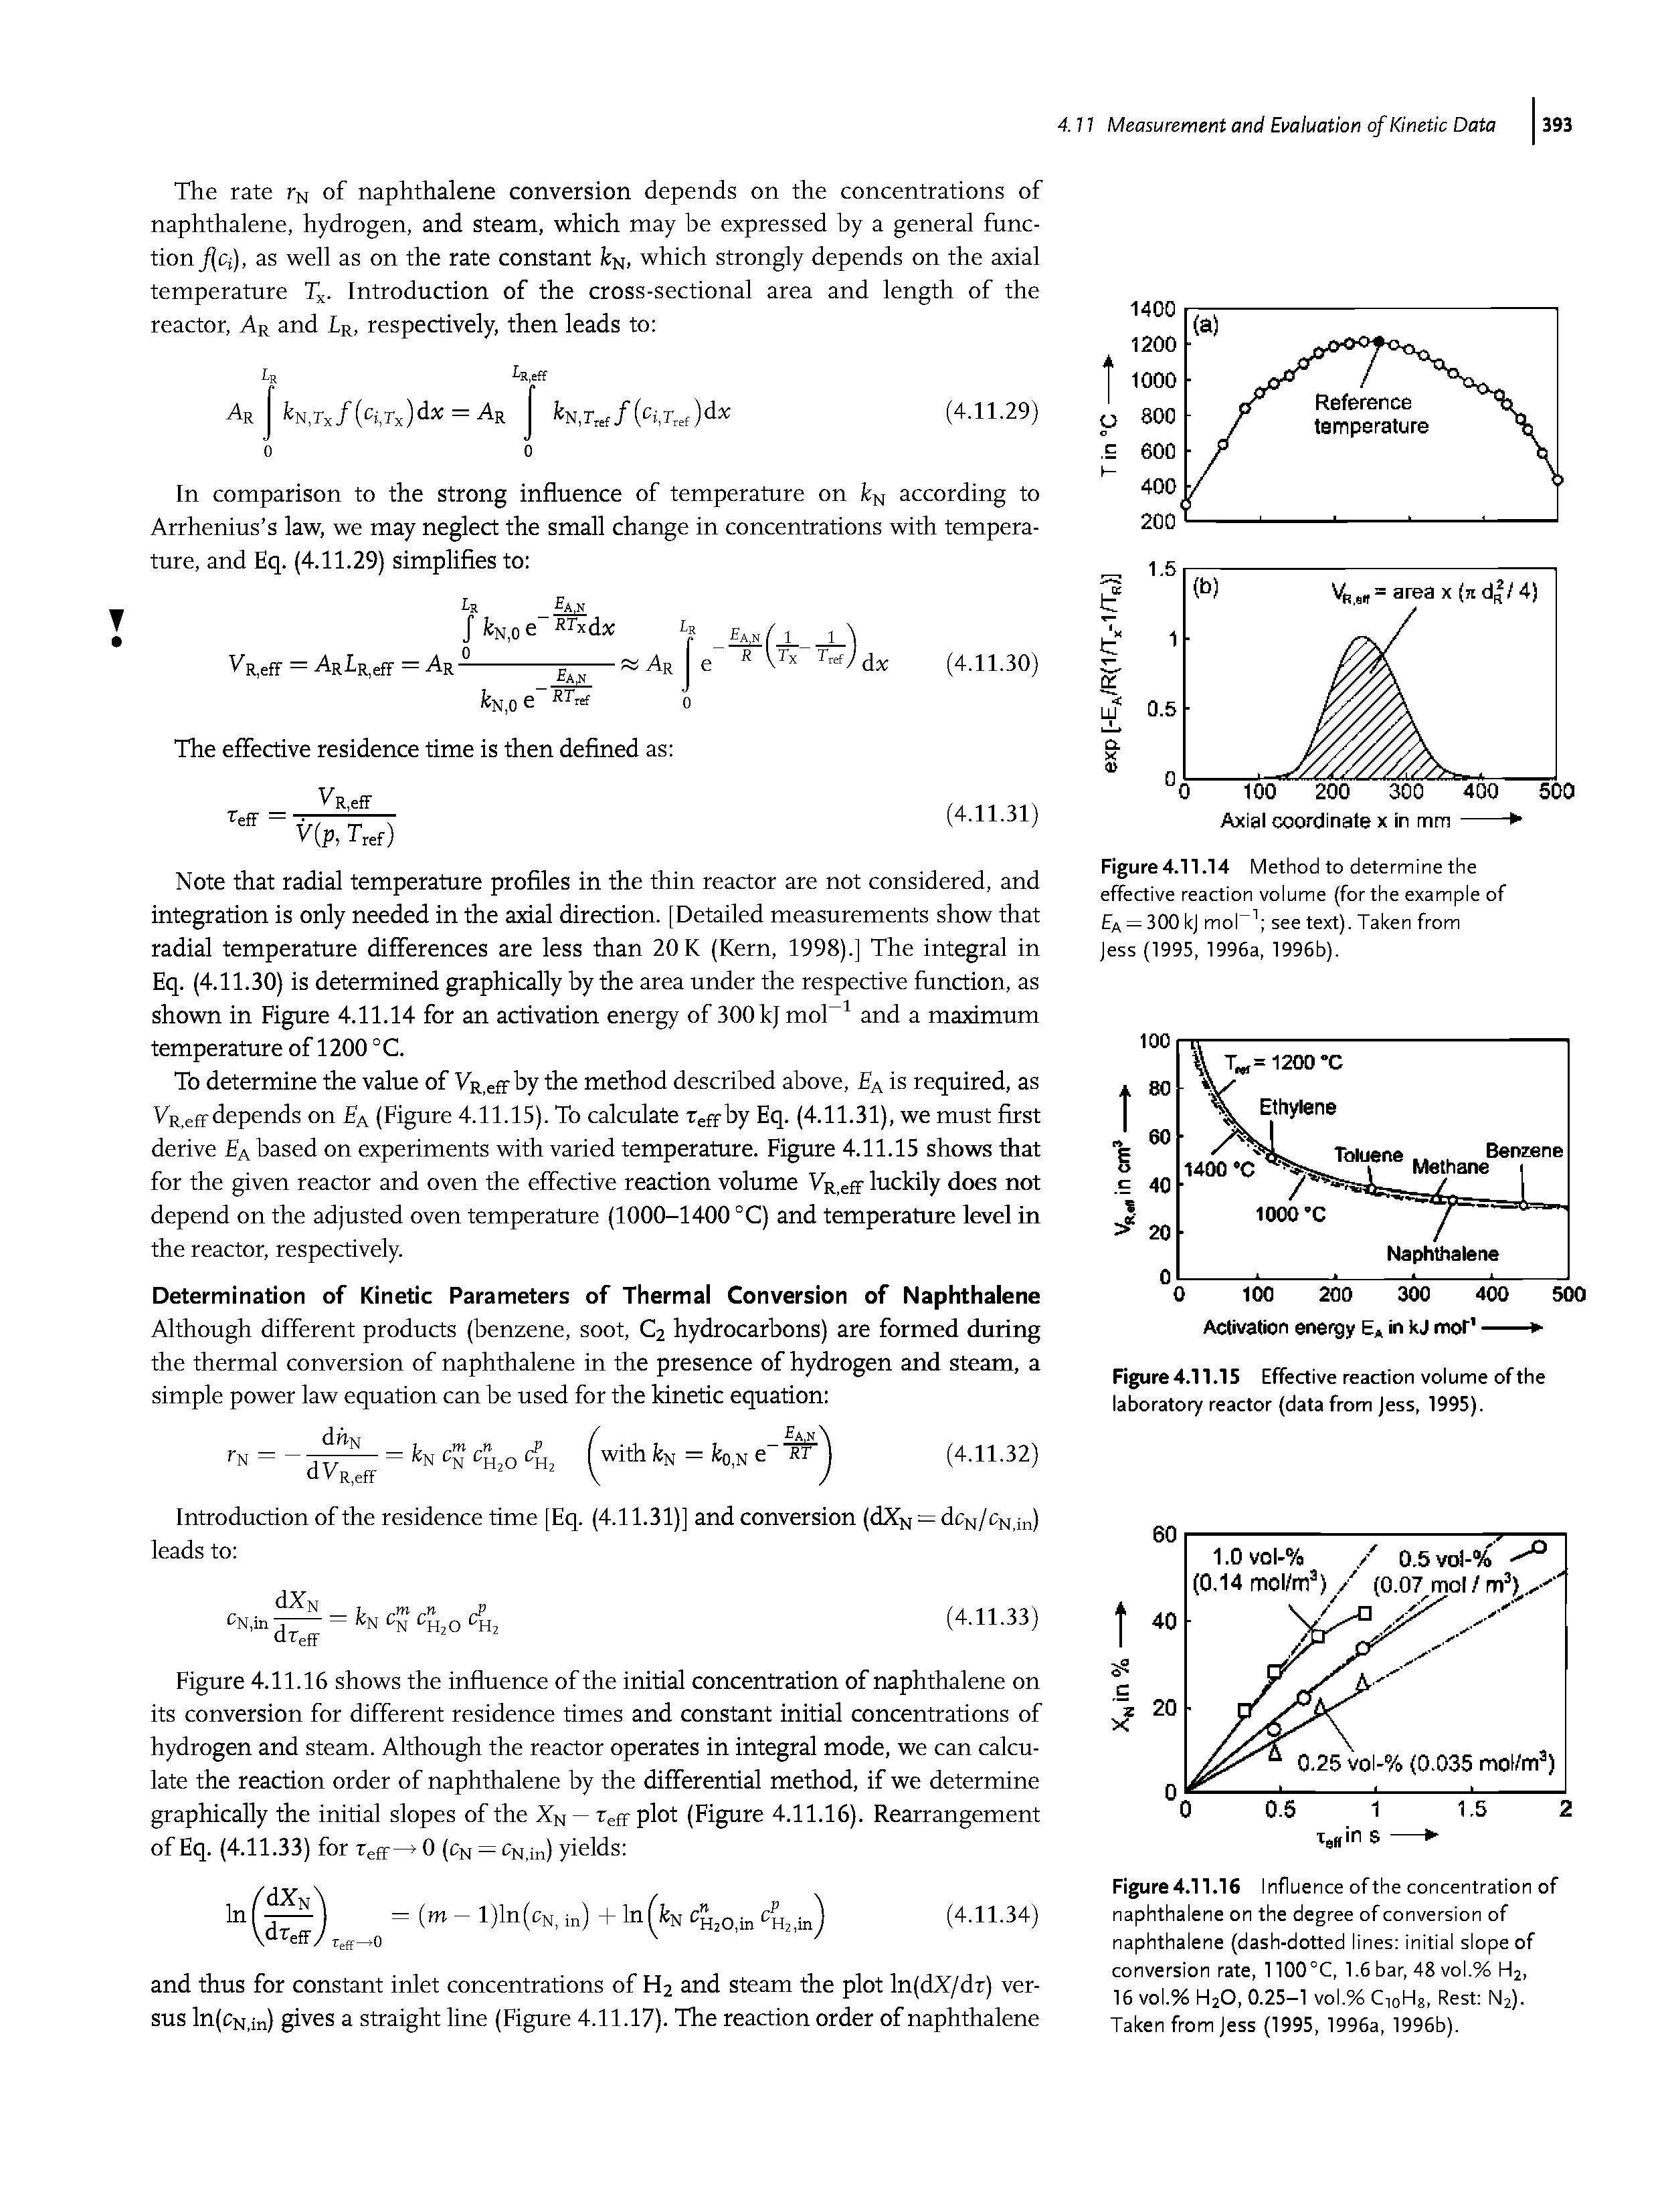 Figure 4.11.14 Method to determine the effective reaction volume (for the example of a = 300 kJ moP see text). Taken from Jess (1995, 1996a, 1996b).